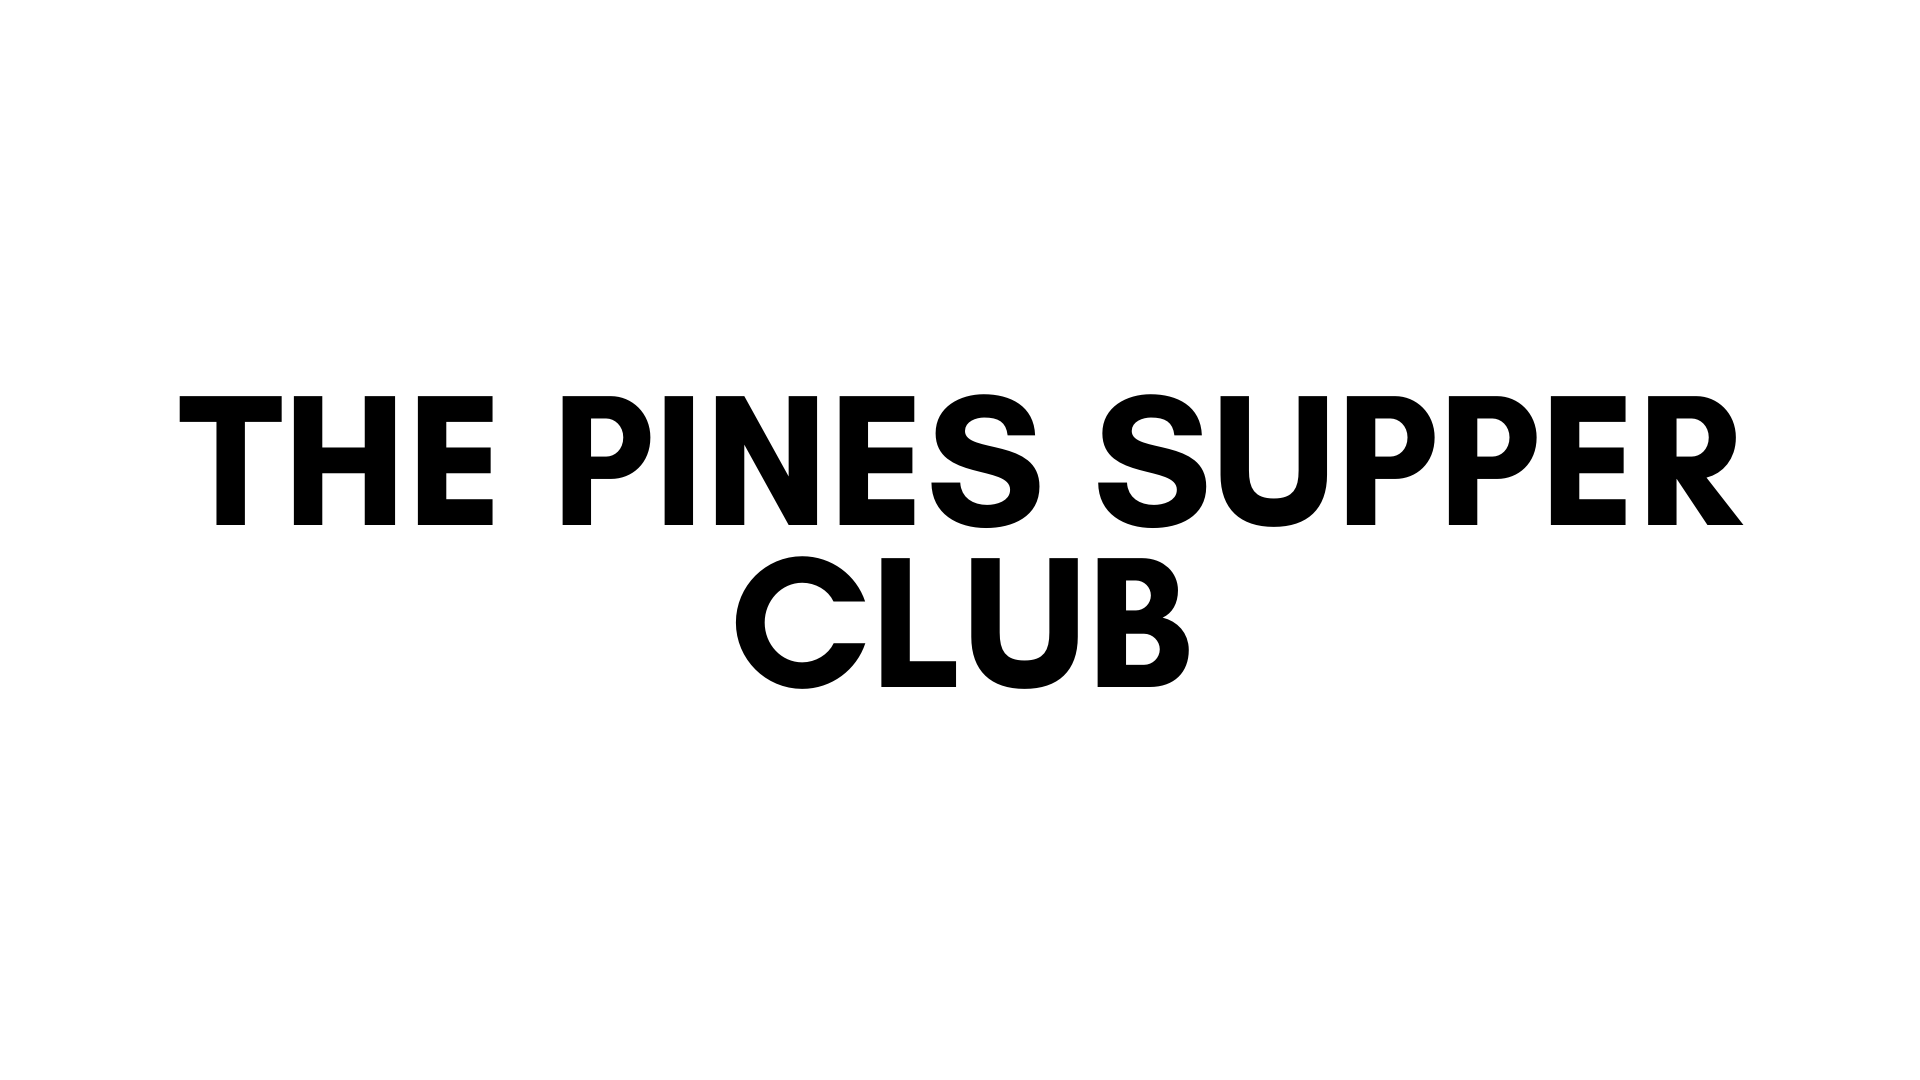 THE PINES SUPPER CLUB